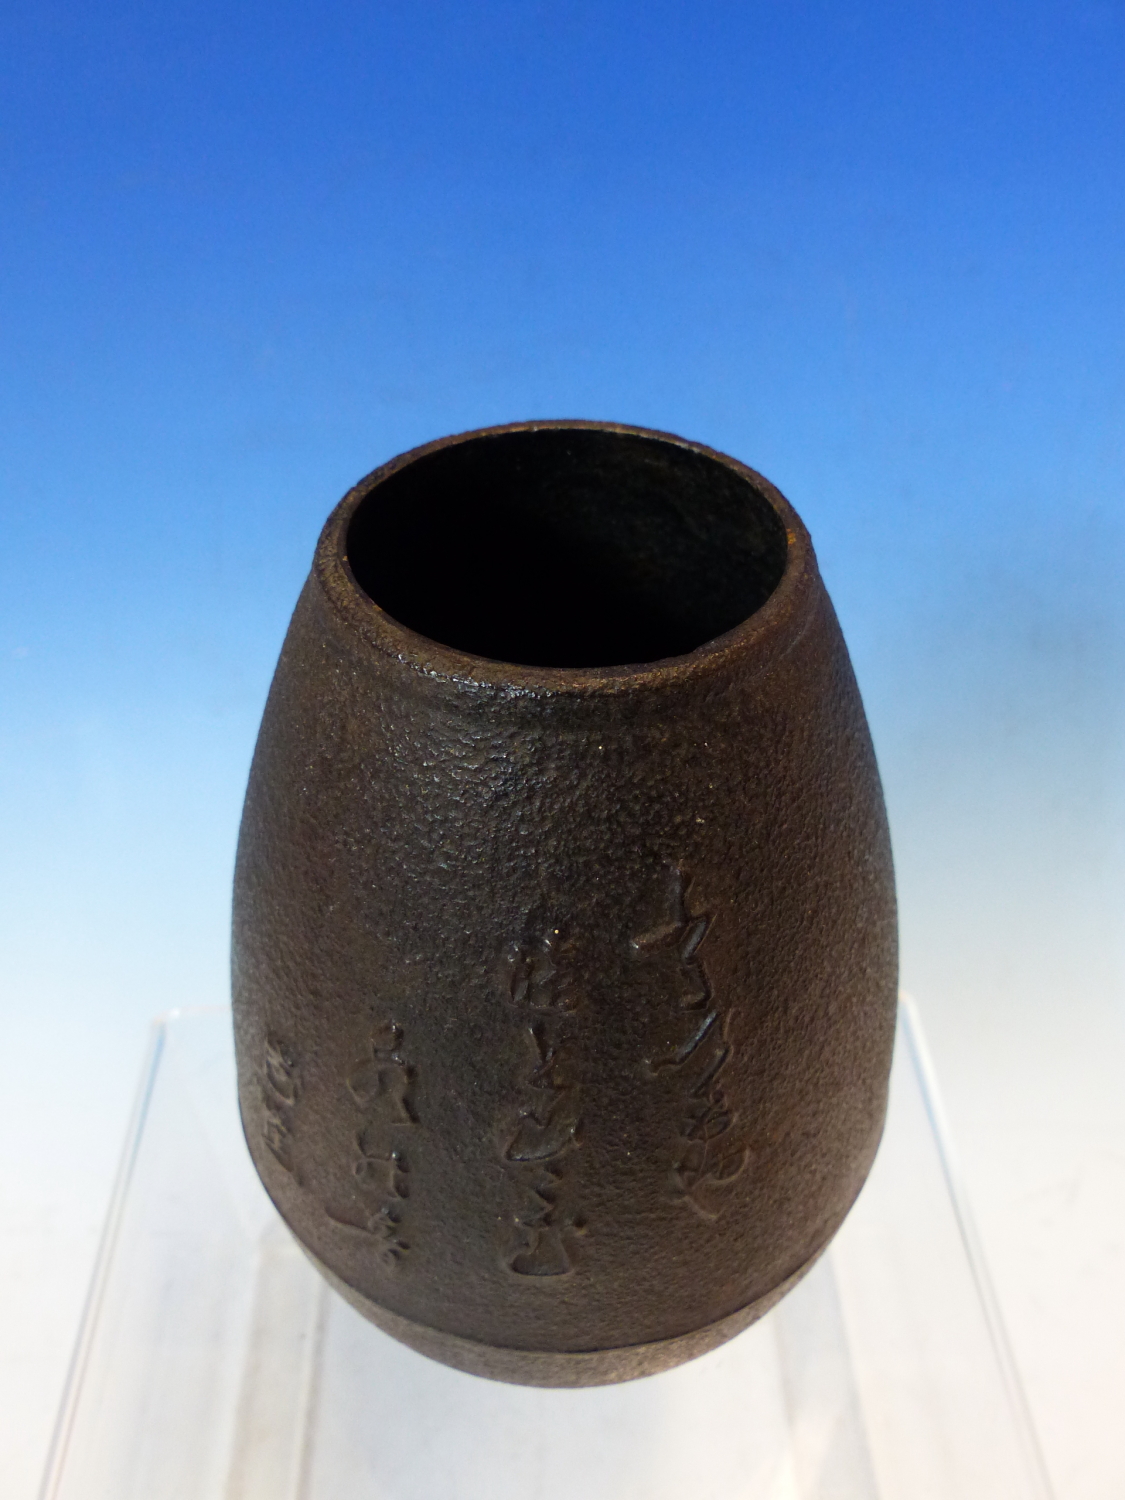 A JAPANESE CAST IRON VASE OF OVOID FORM WITH SCRIPT DECORATION AND SIGNITURE SEAL. 13CM HIGH - Image 2 of 9